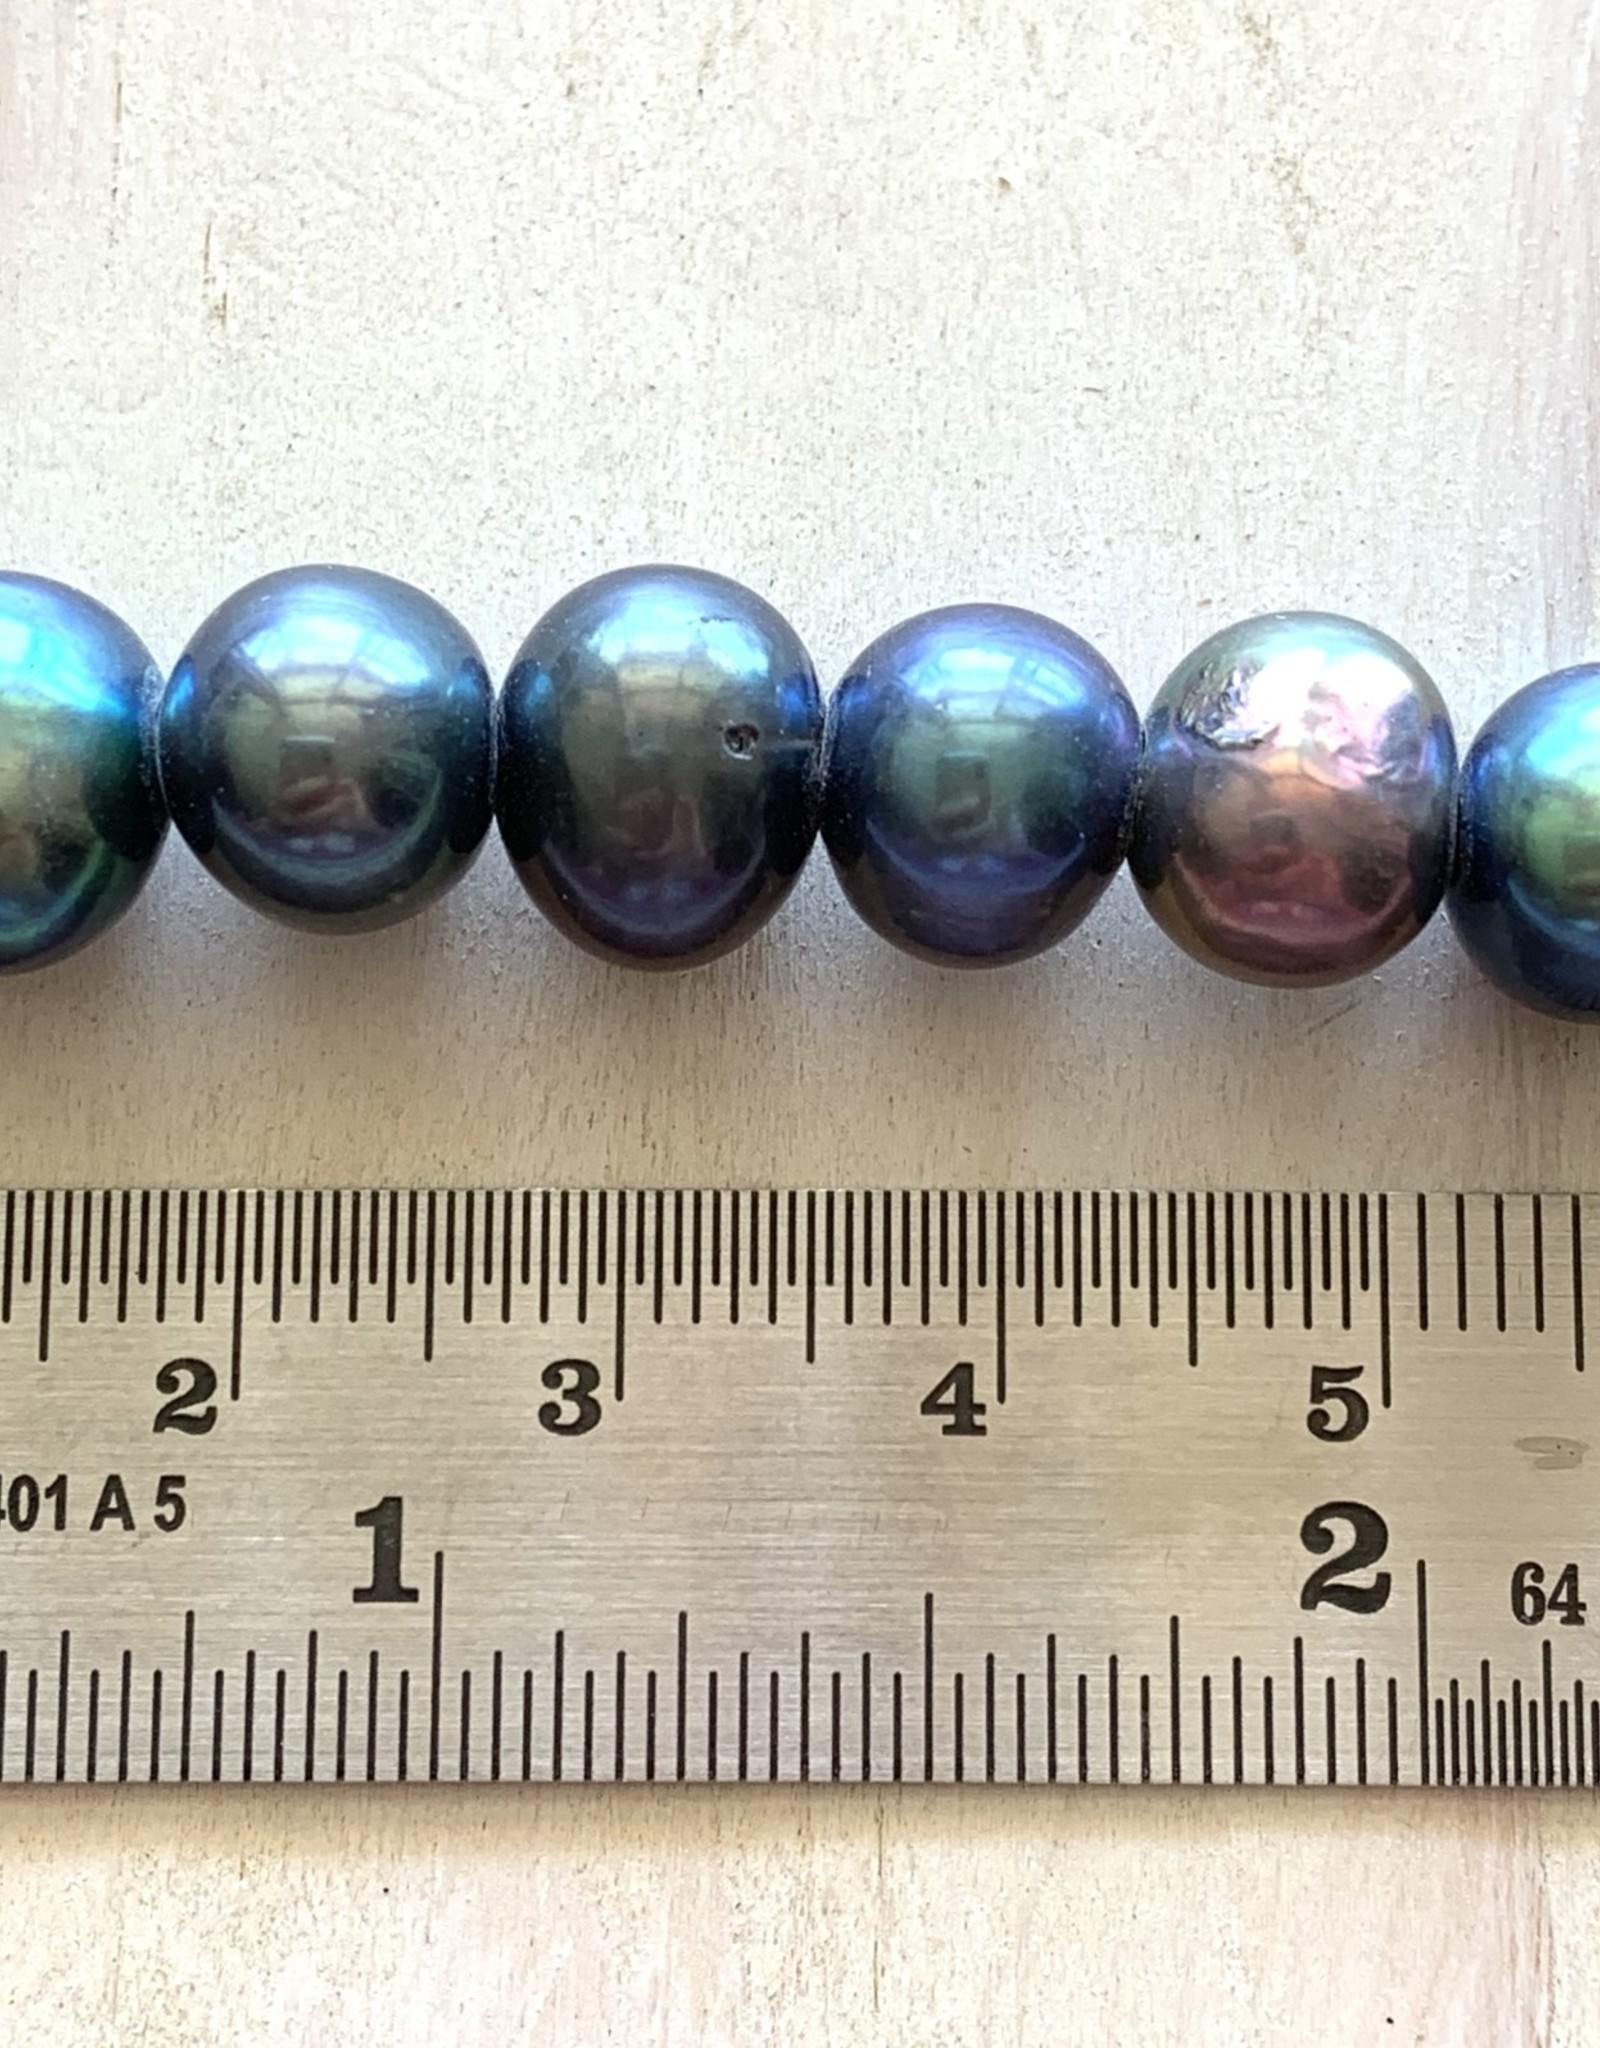 10mm Peacock Pearl Large Hole Strand